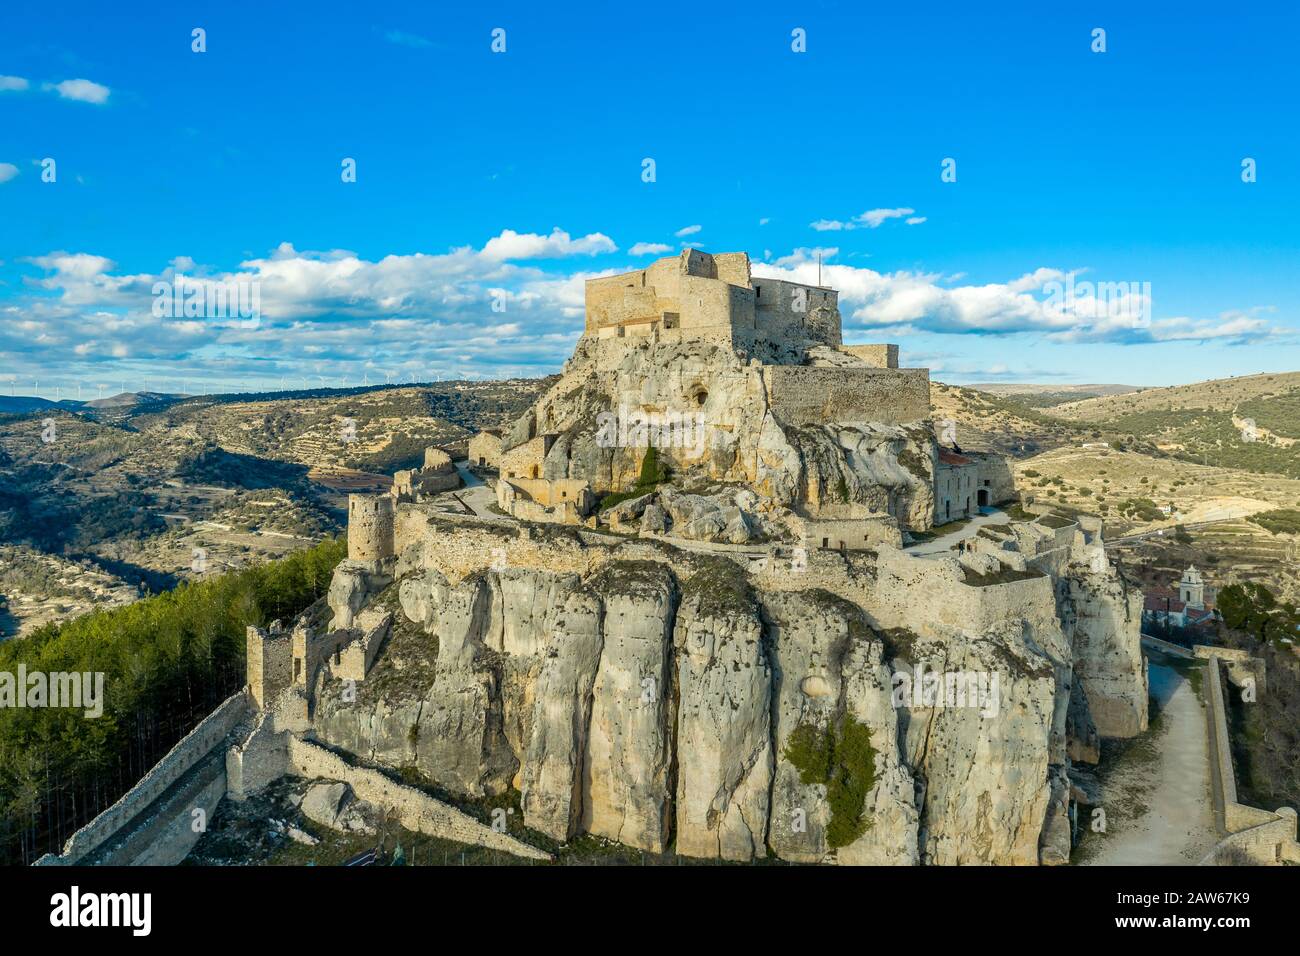 Aerial sunset view of Morella, medieval walled town with semi circular towers and gate houses crowed by a fortress on the rock in Spain Stock Photo